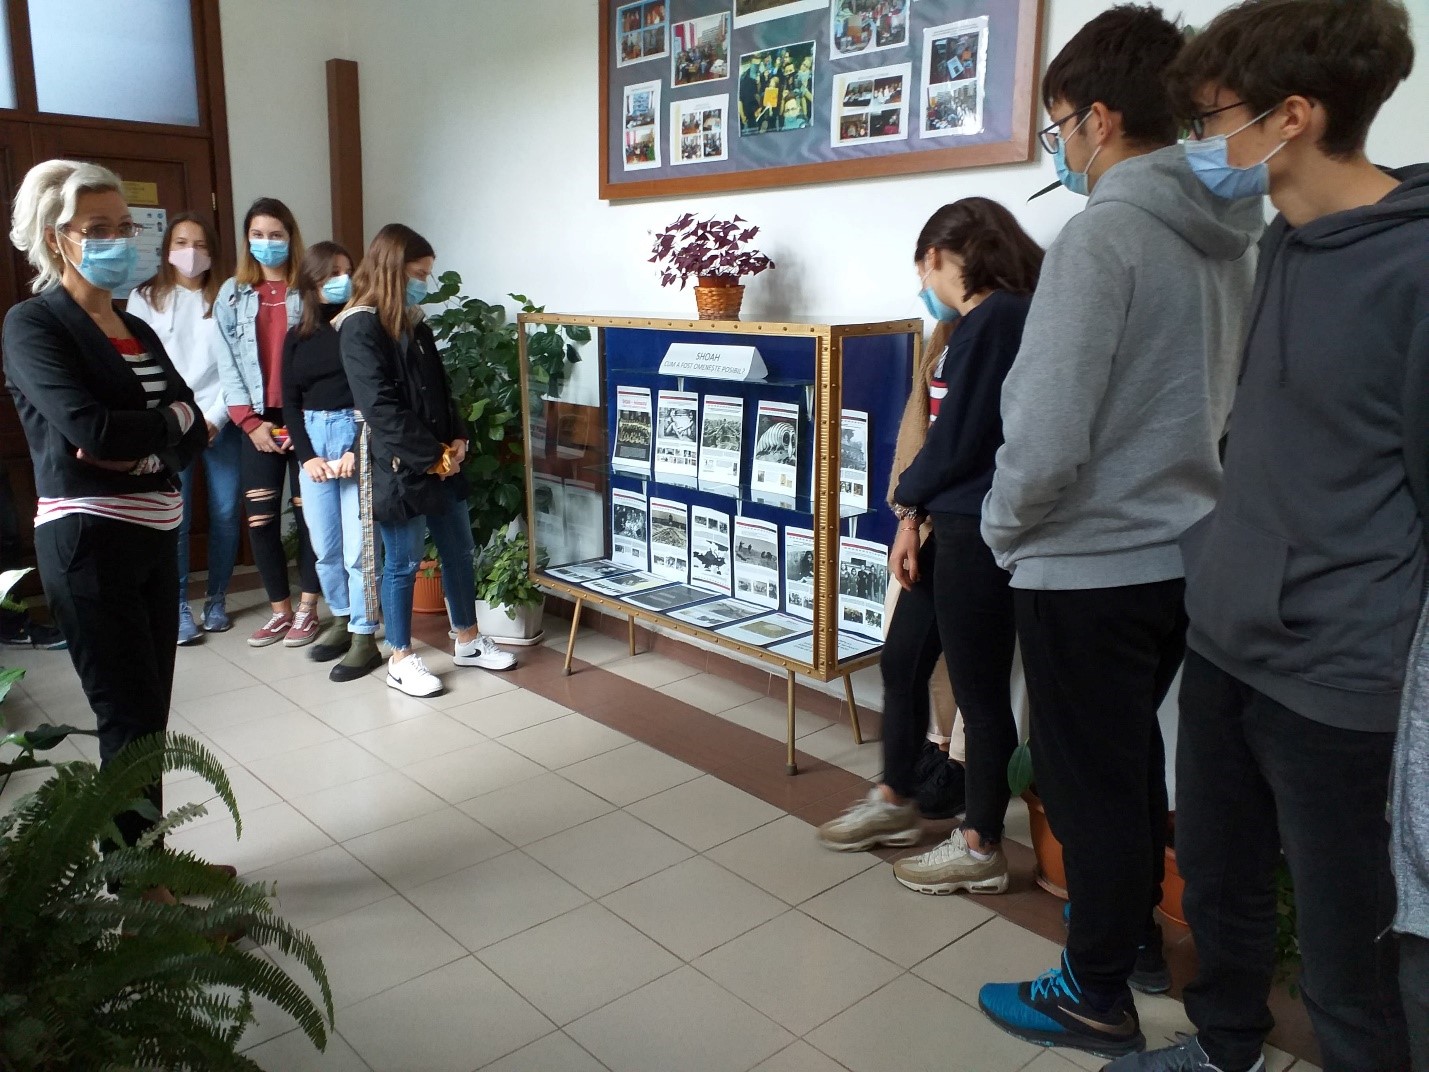 International Poetry Day at “Ioan Petruș” High-School in Otopeni